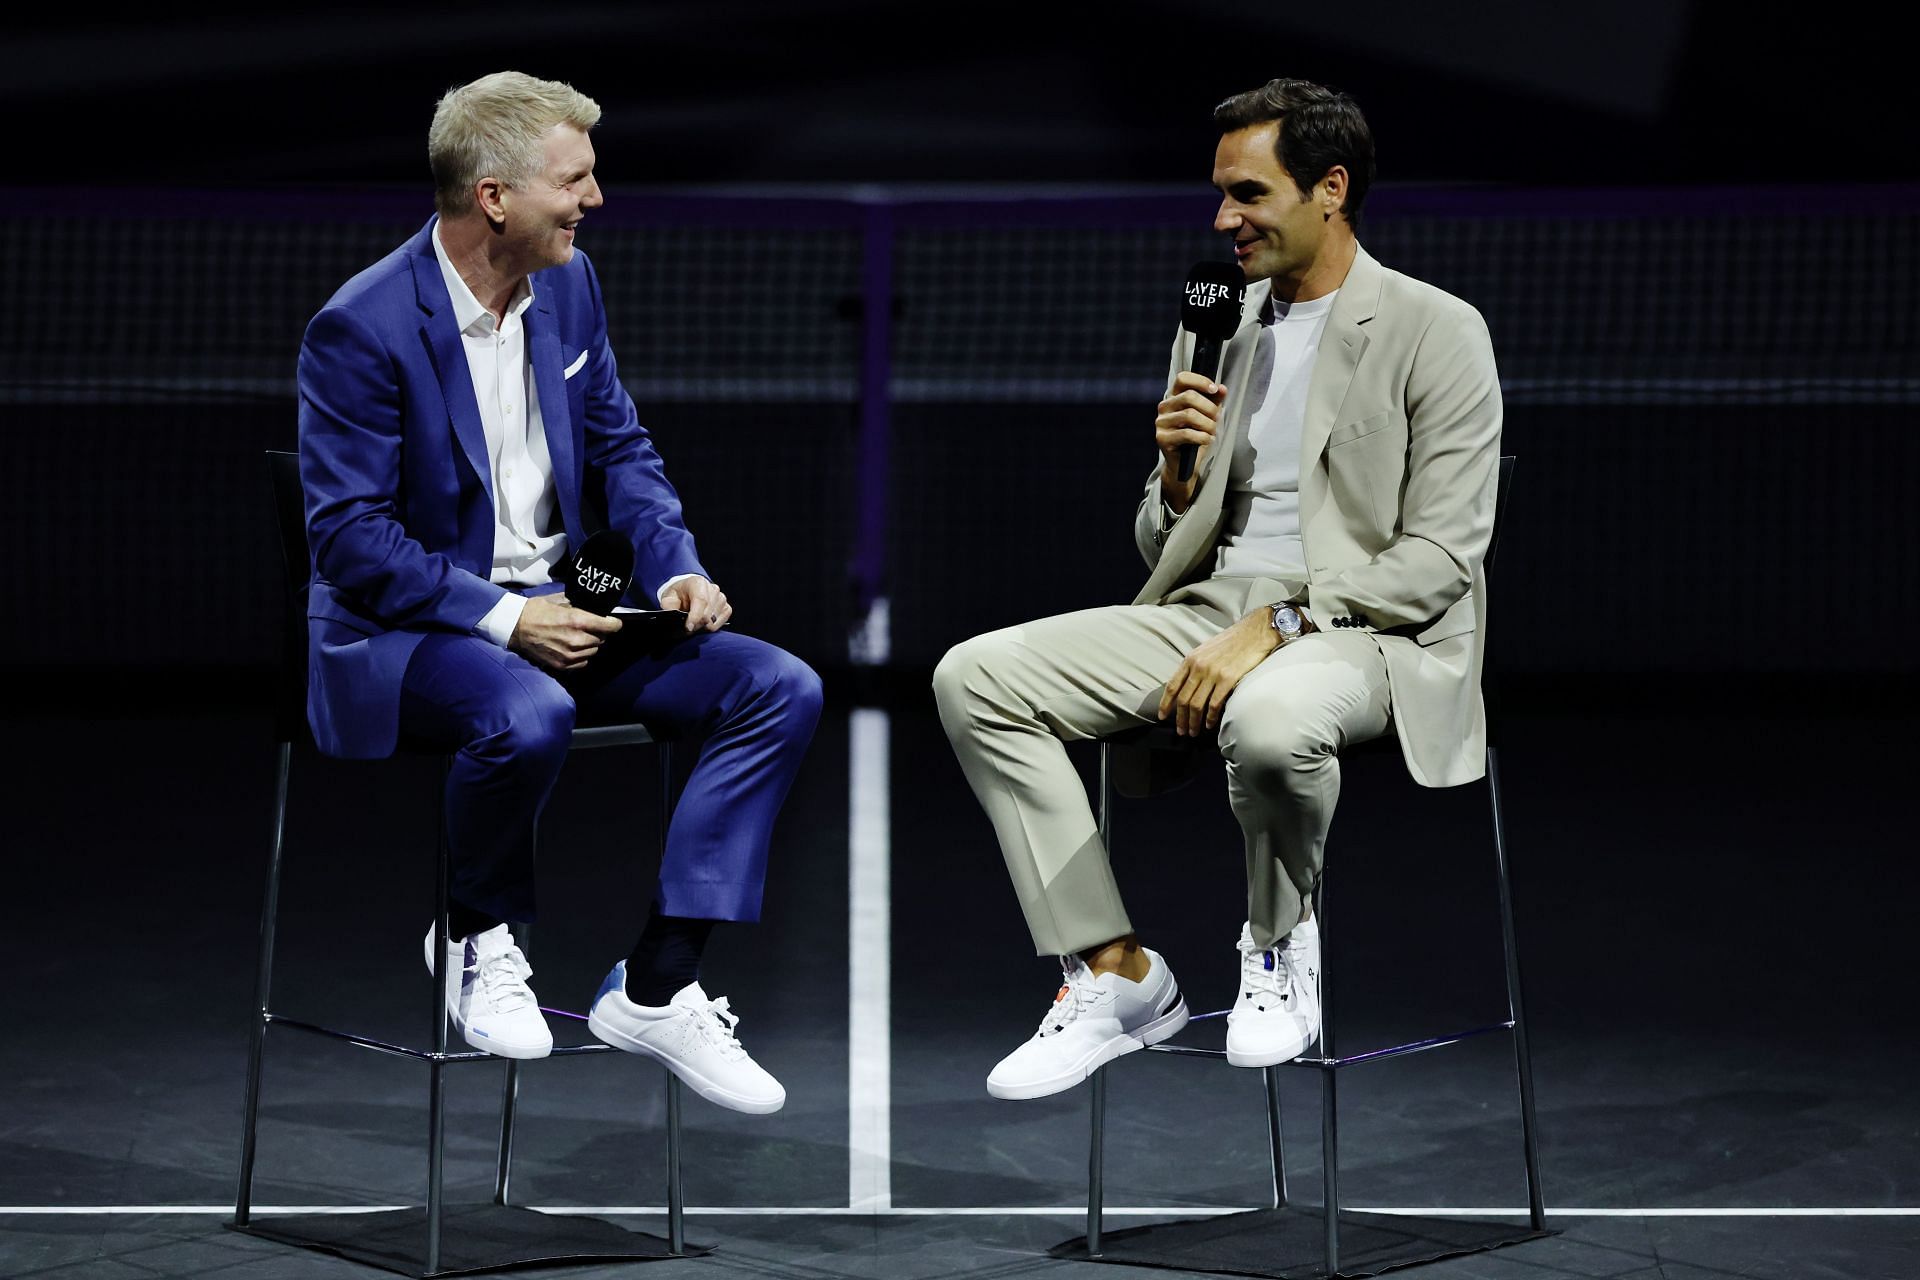 Roger Federer being interviewed by Jim Courier at the 2023 Laver Cup